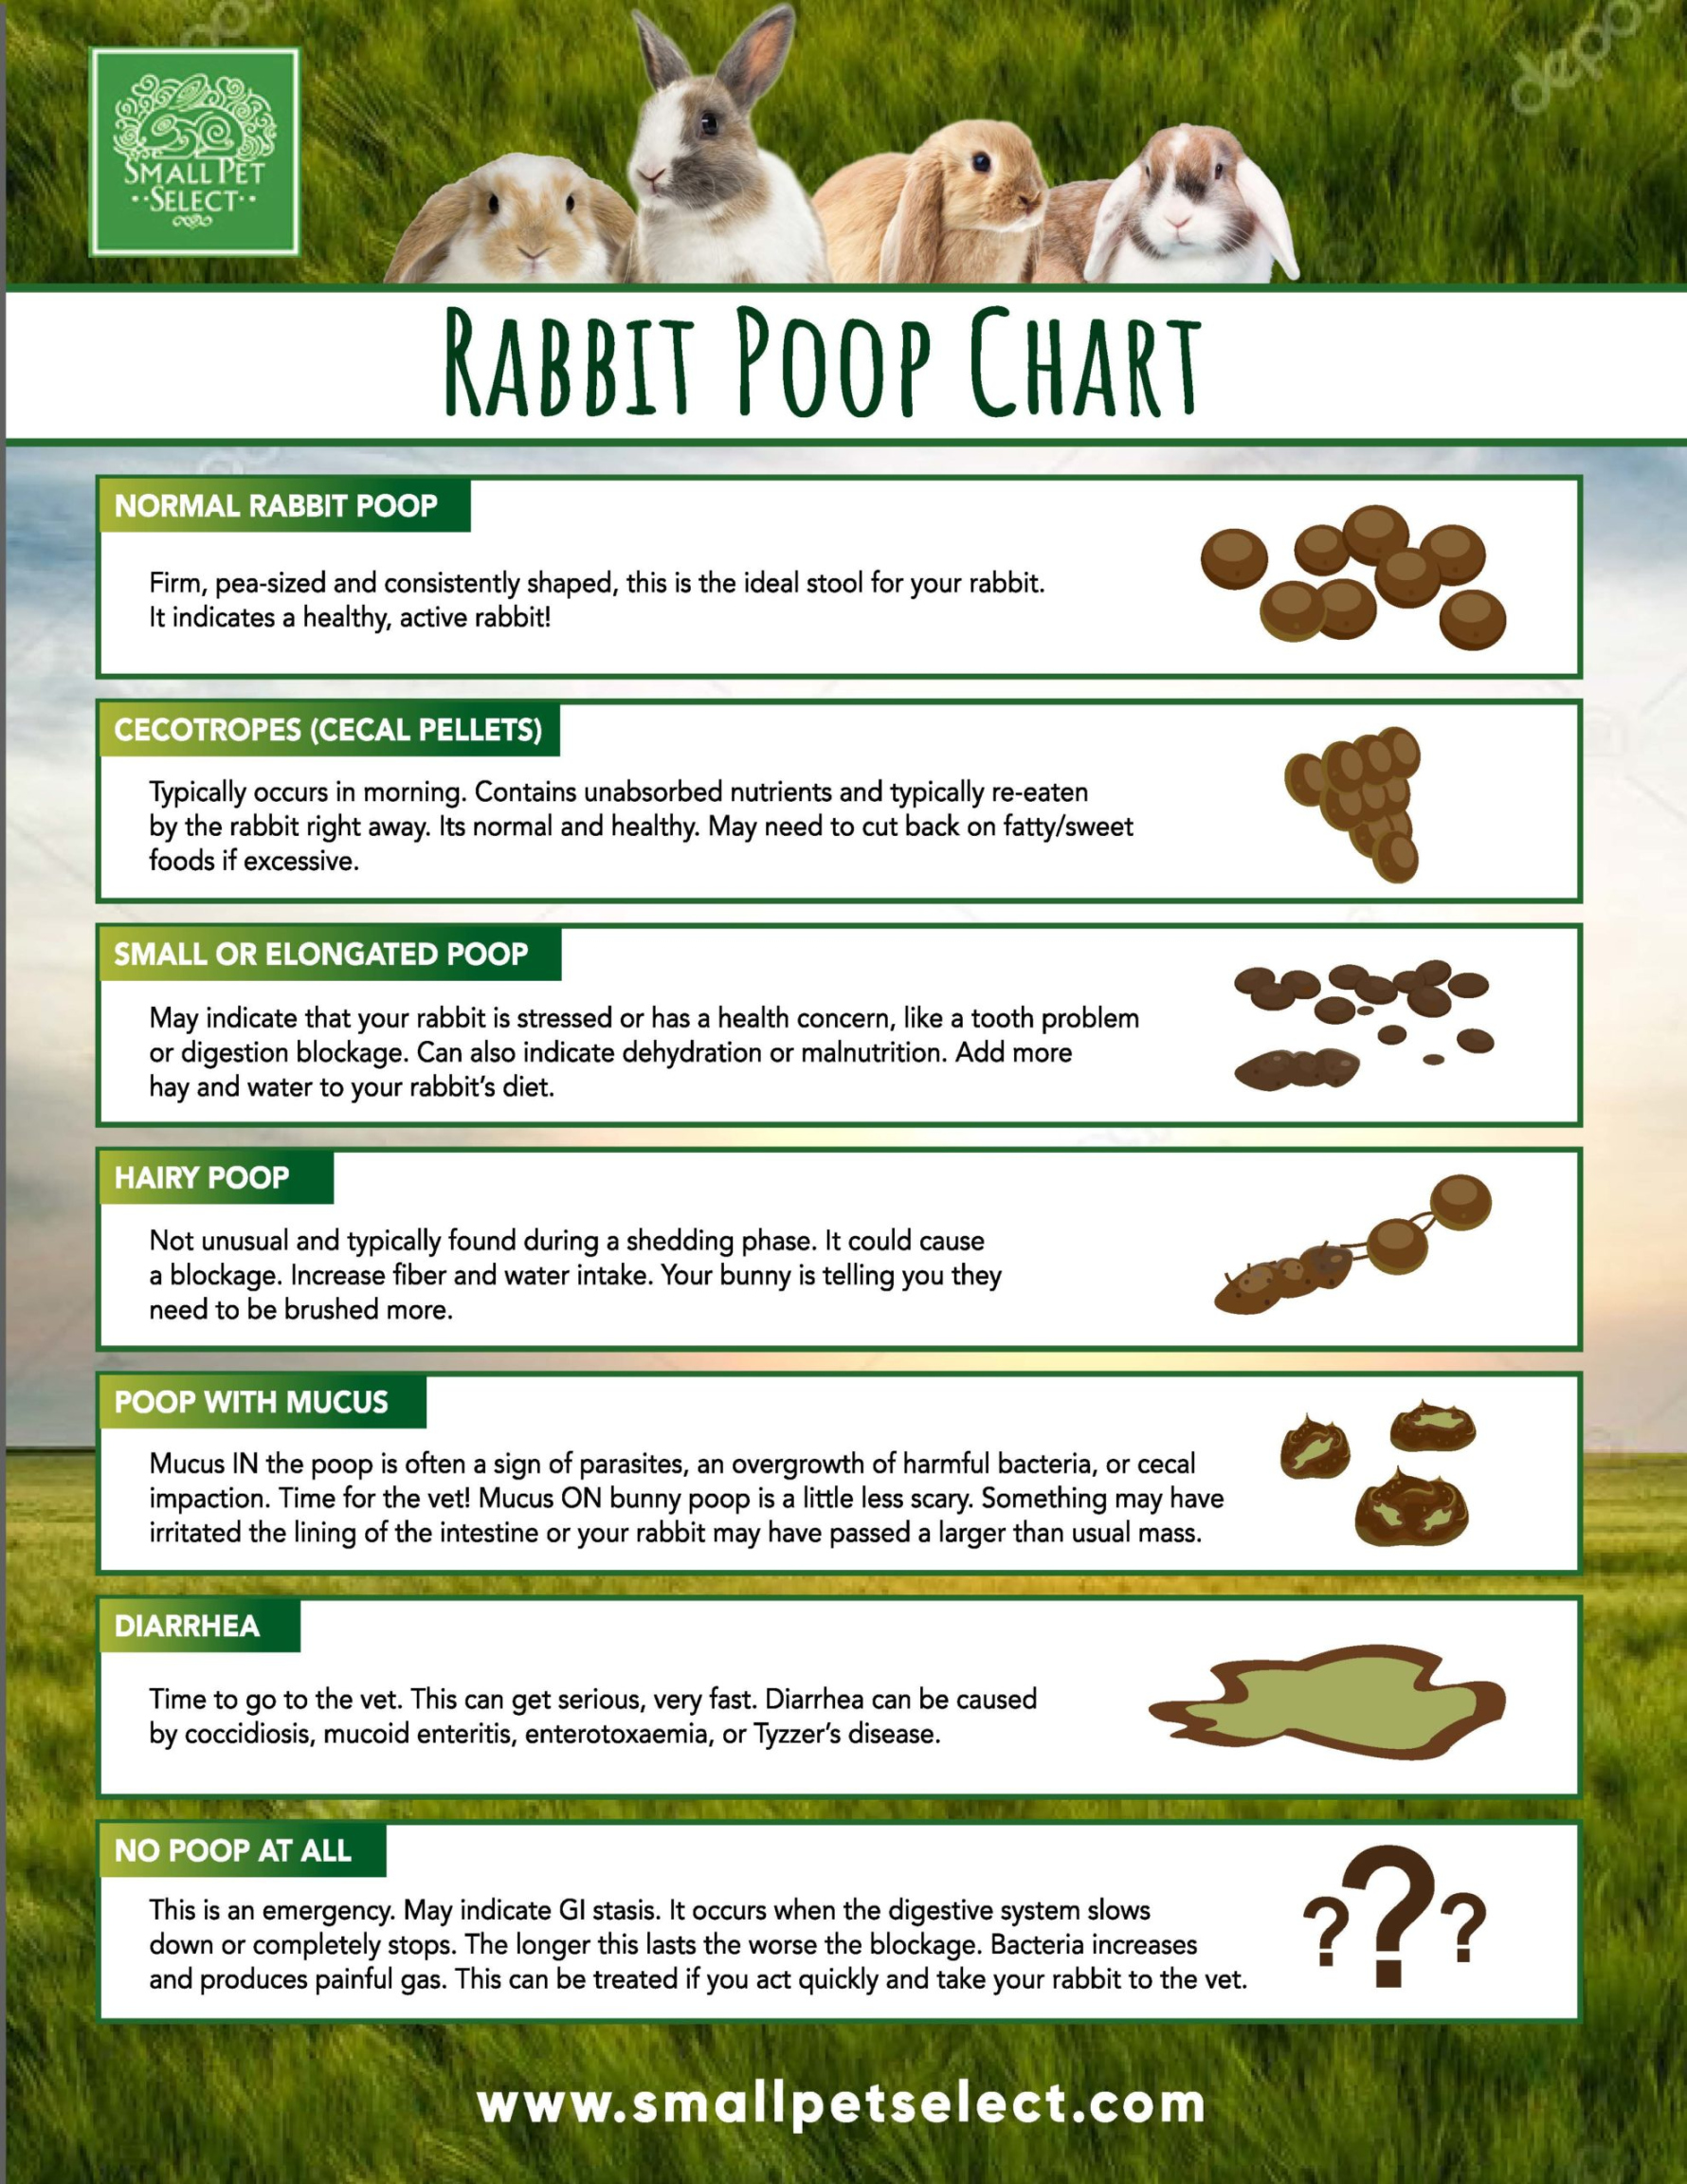 What Rabbit Poop Can Tell You? Small Pet Select